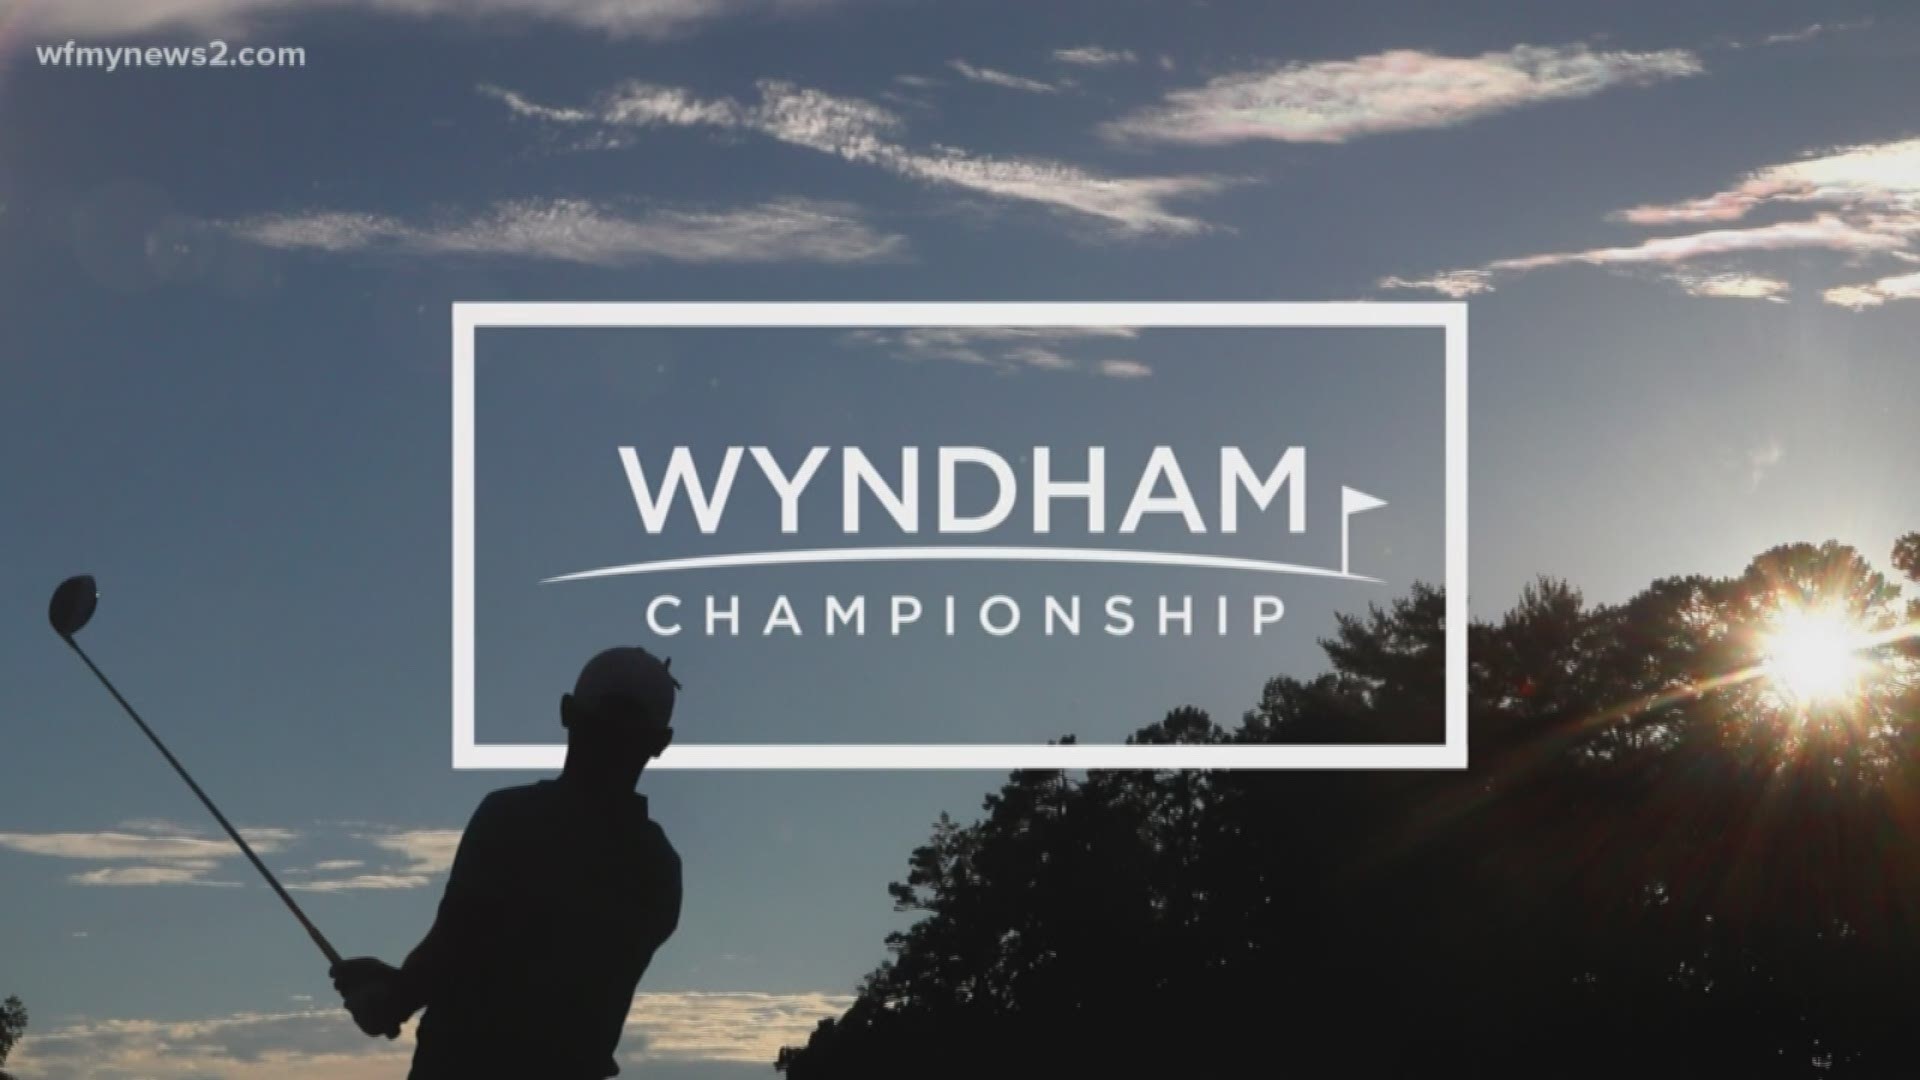 What's Going On Around The Wyndham